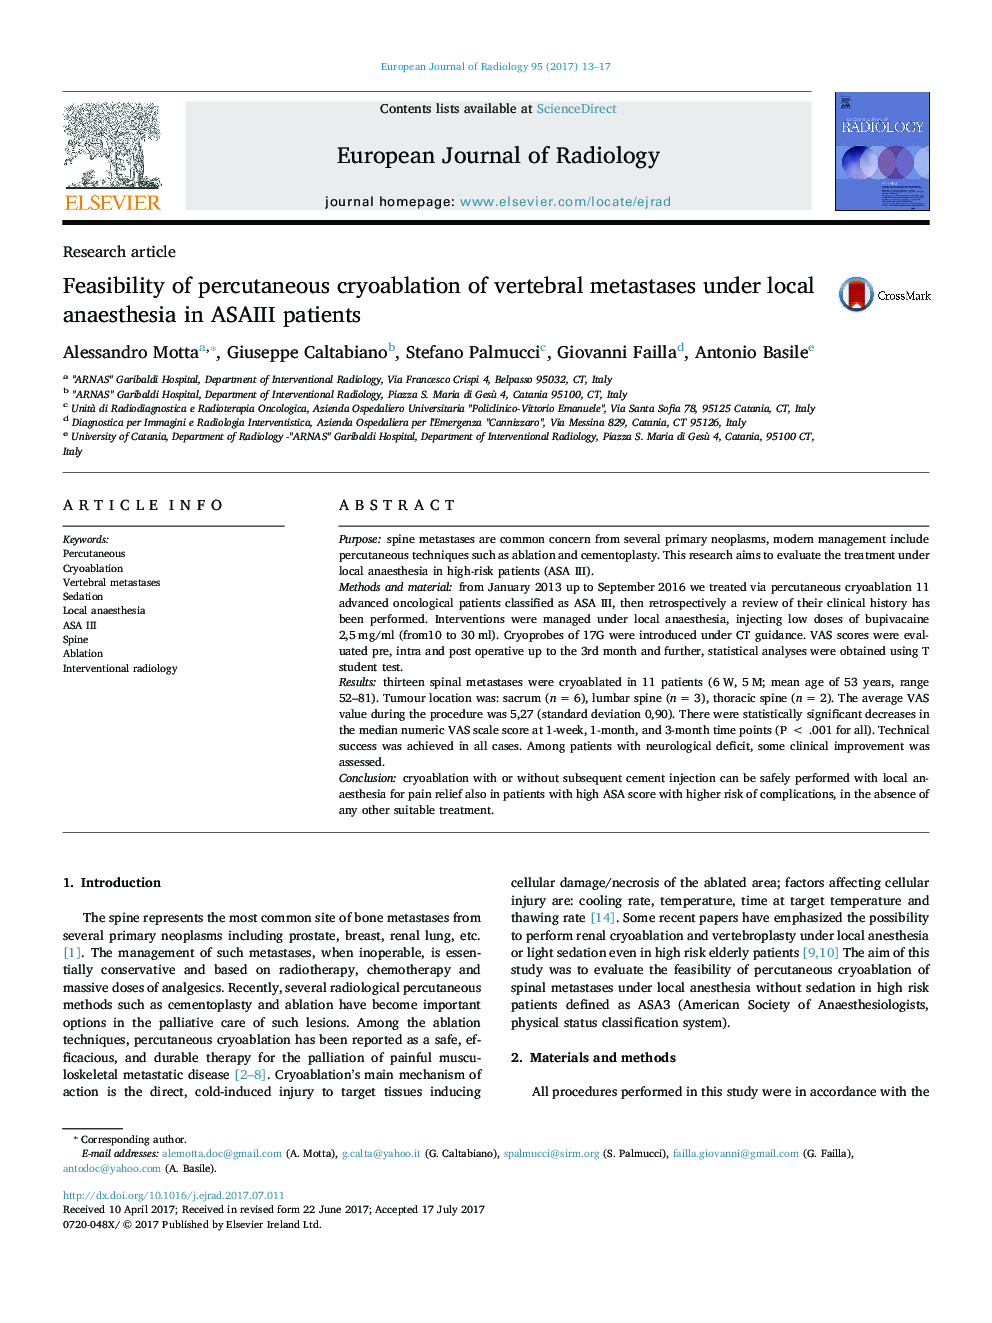 Research articleFeasibility of percutaneous cryoablation of vertebral metastases under local anaesthesia in ASAIII patients